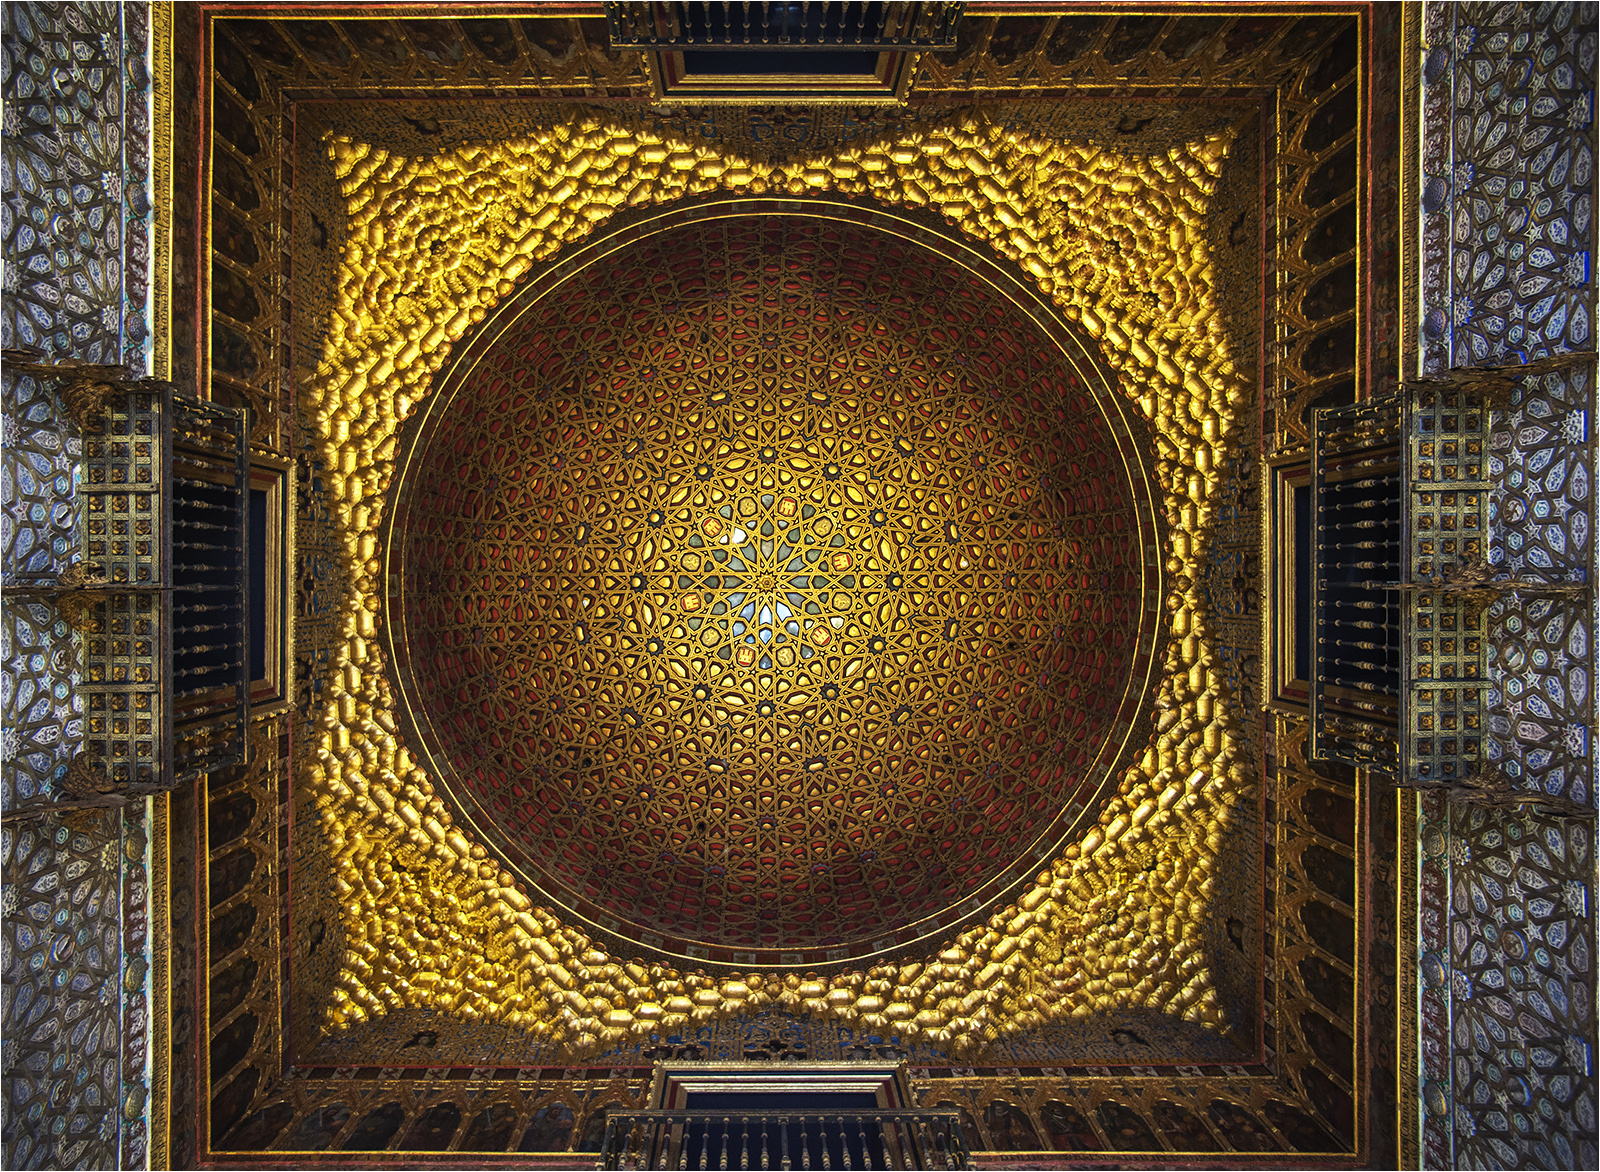 GOLD CEILING OF THE AMBASSADORS IN THE ALCAZAR SEVILLE